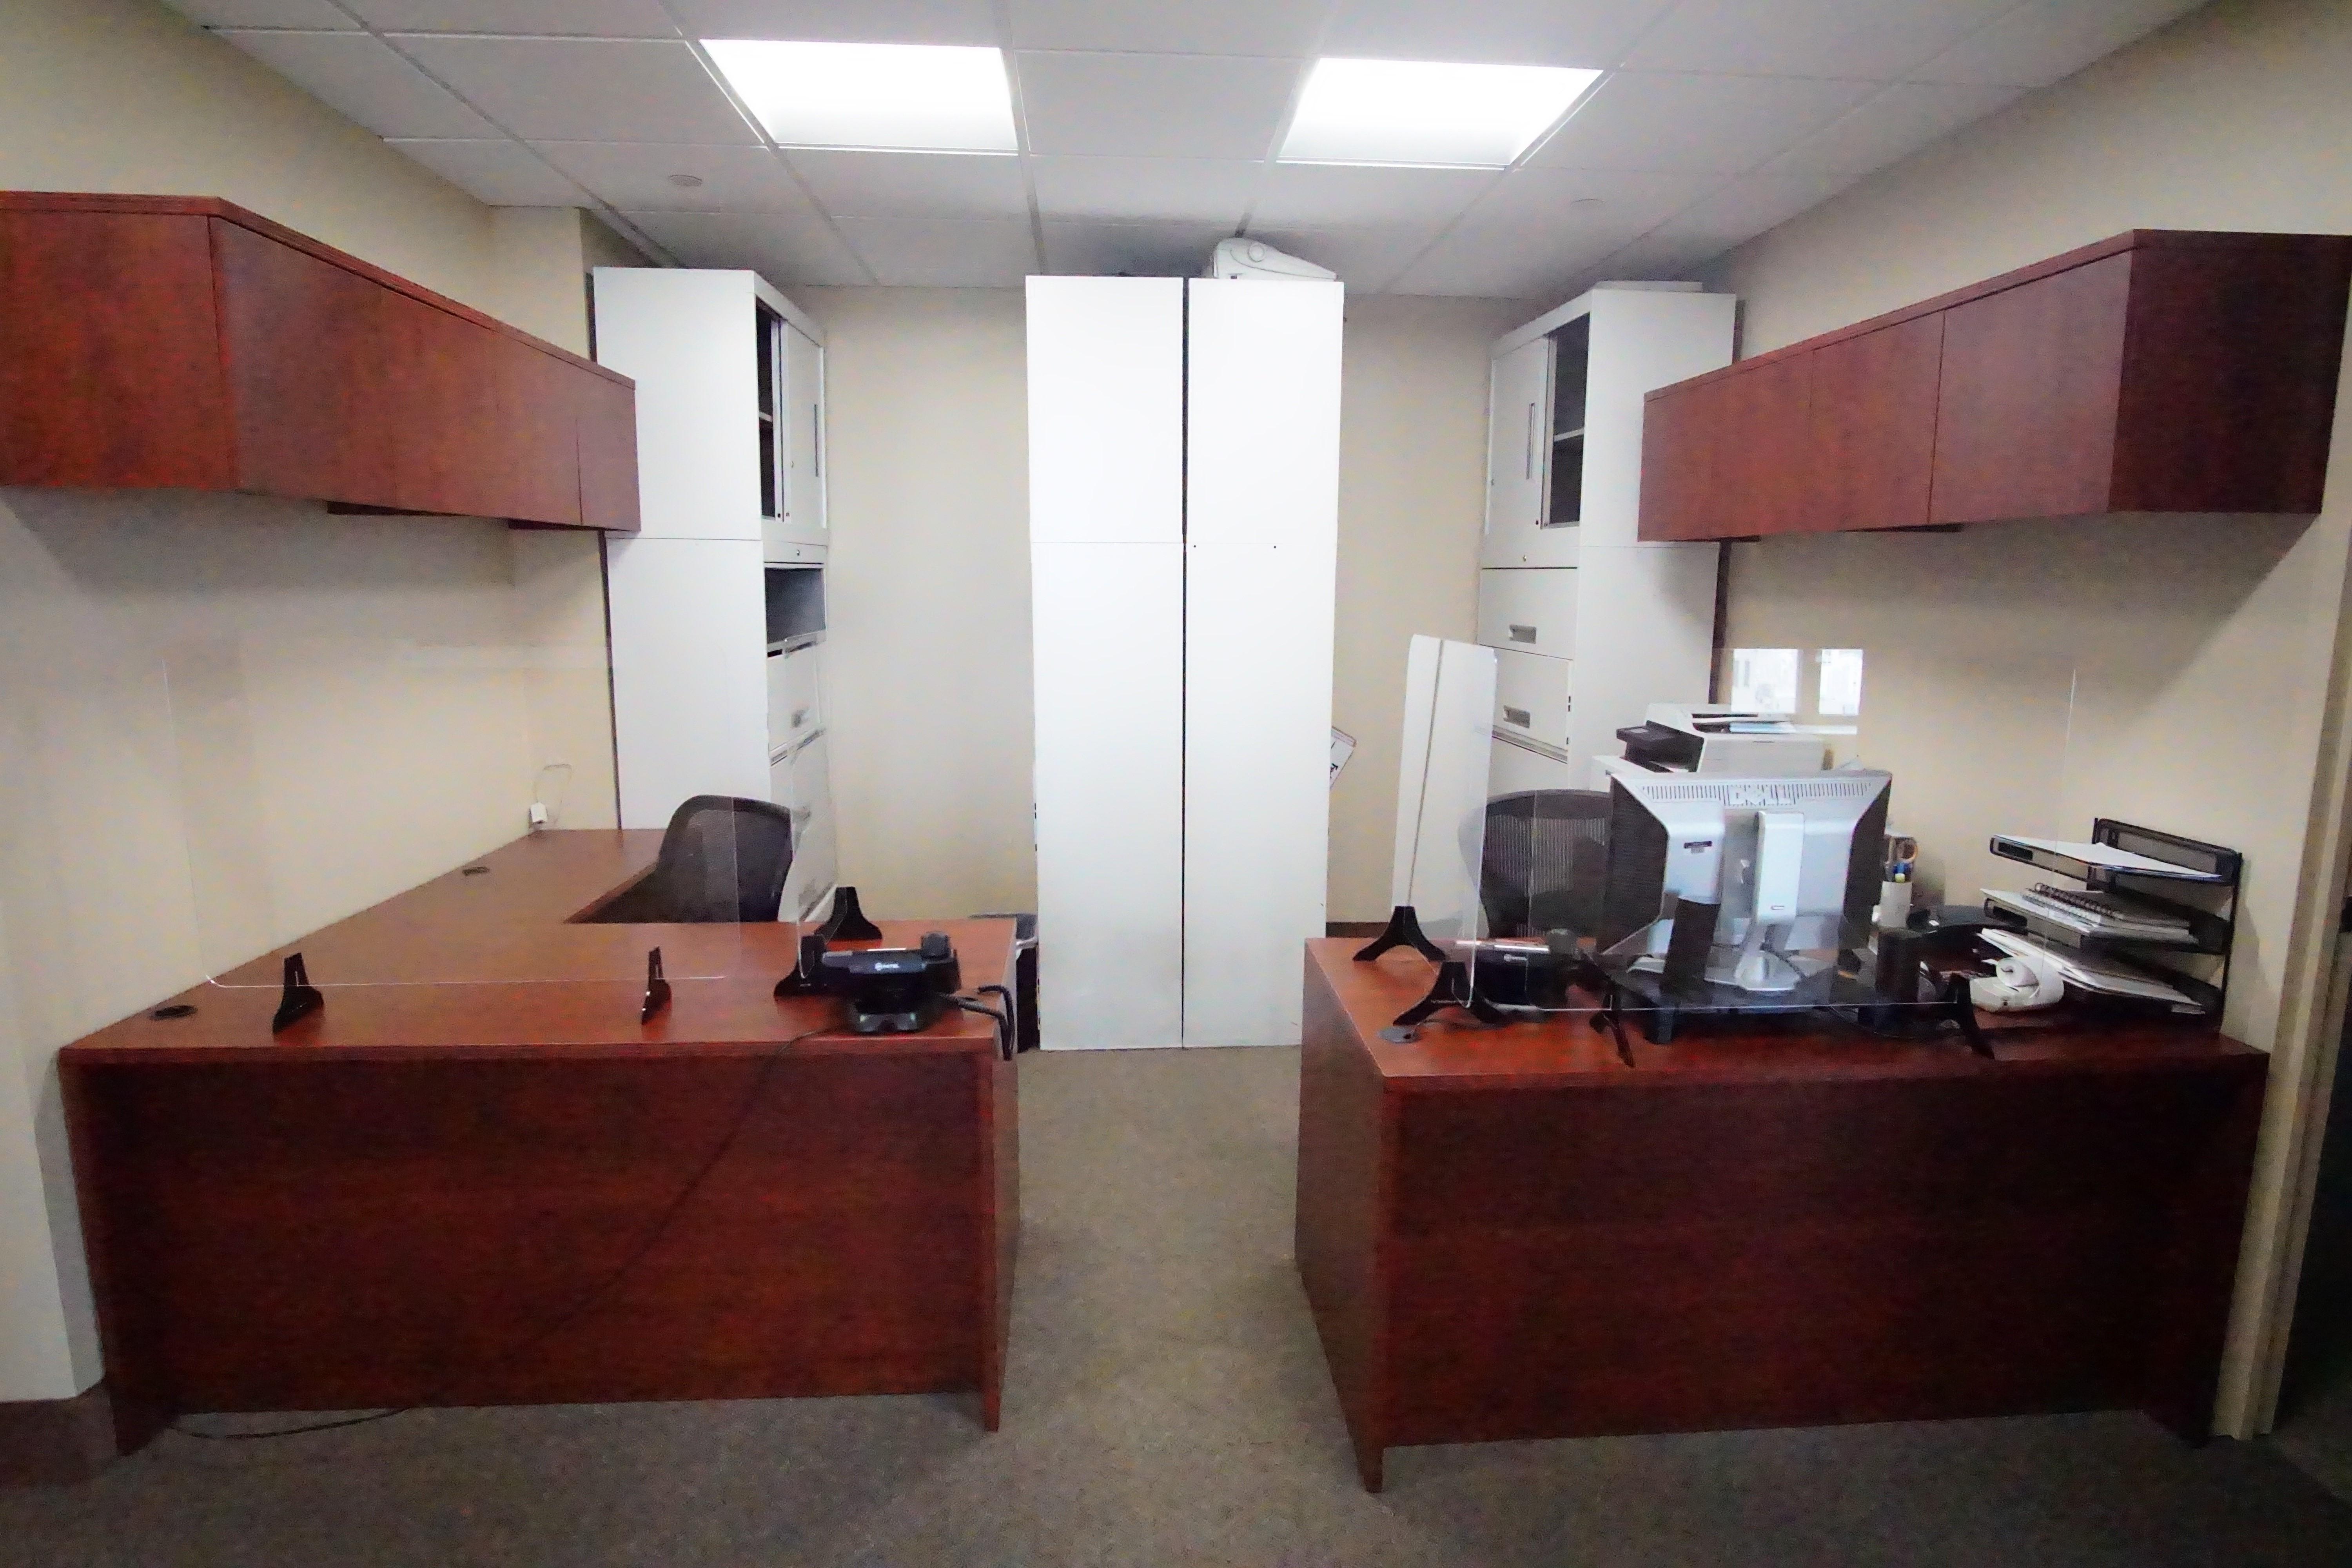 110 East 59th Street New York NY Double Workstations with plexiglass partitions